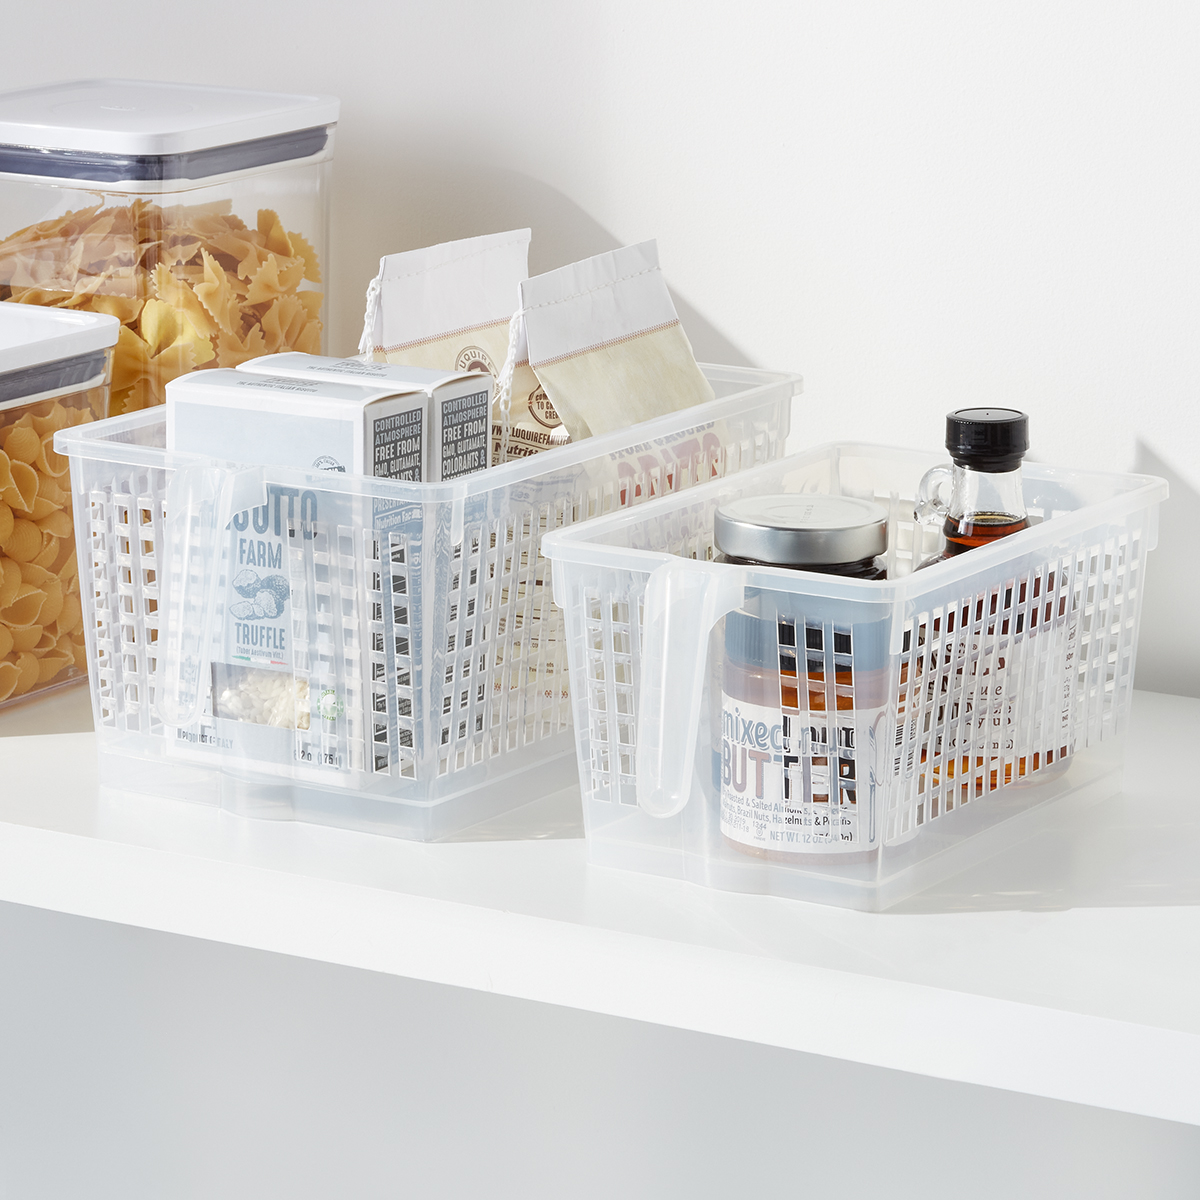 Handled Pantry Organizer Storage Baskets | The Container Store